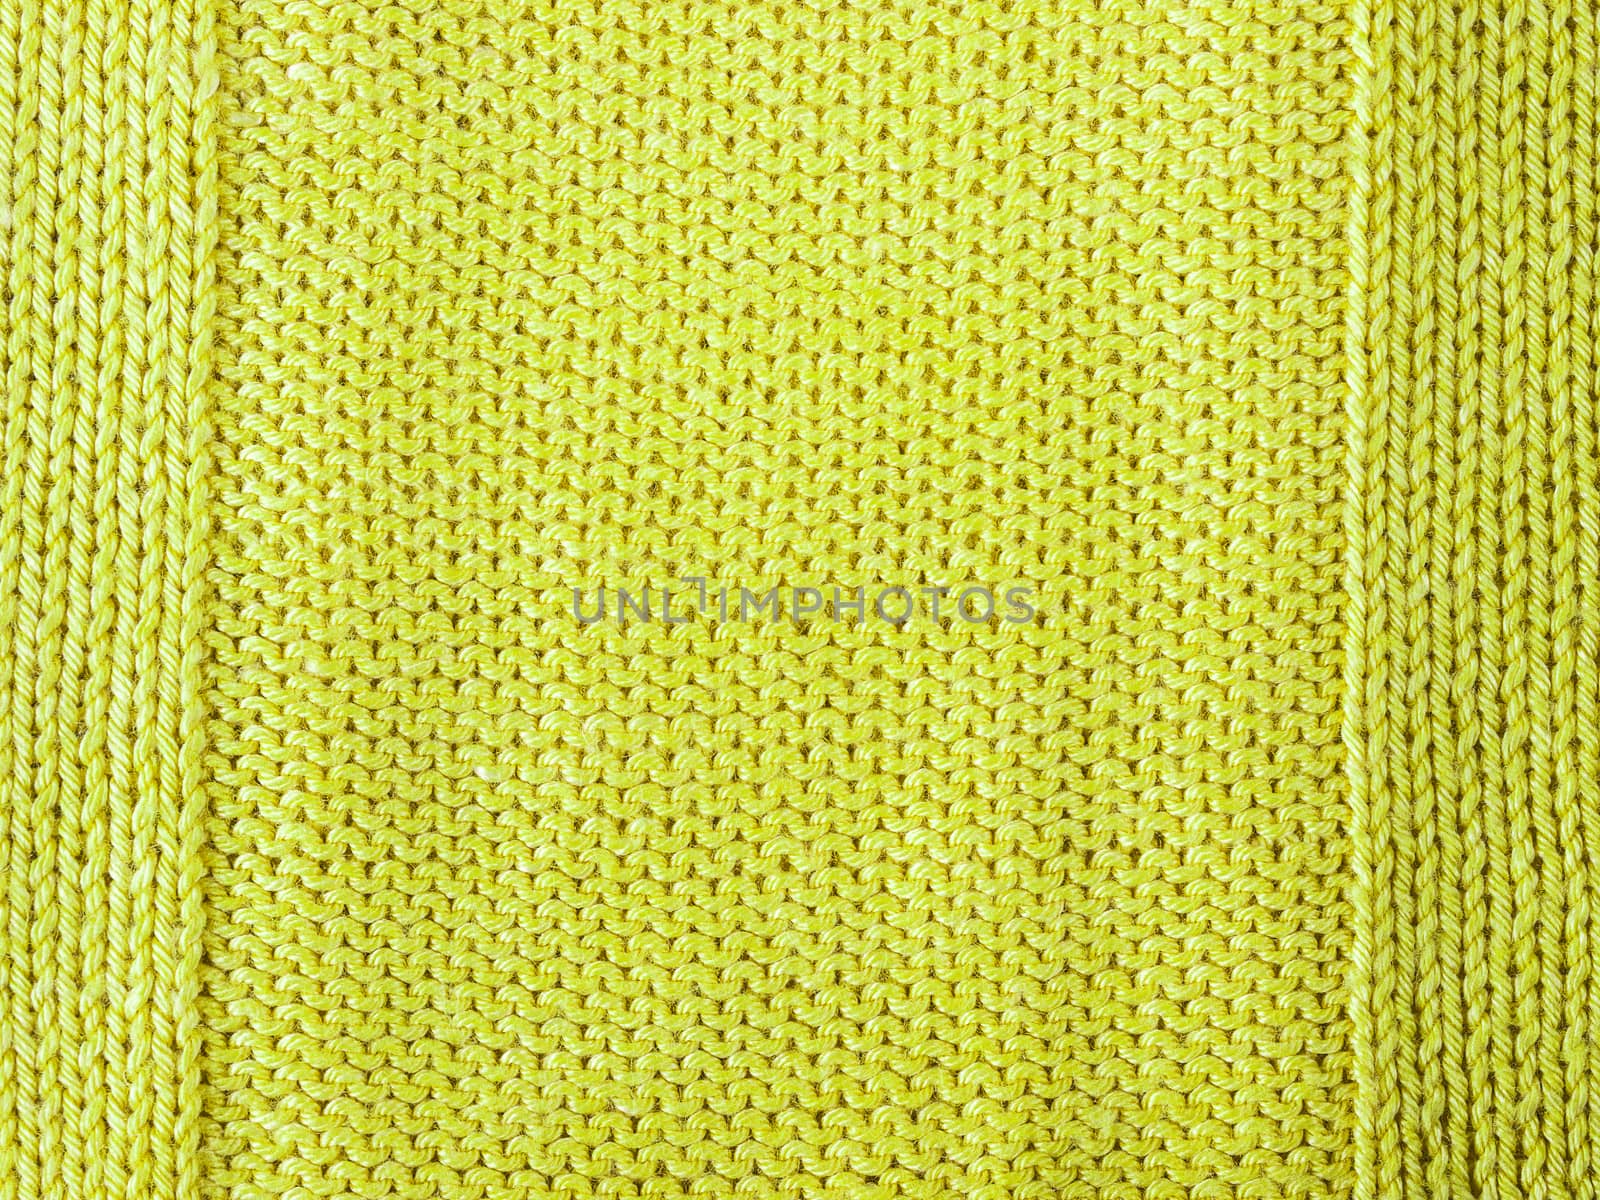 red knitted Jersey as a textile background